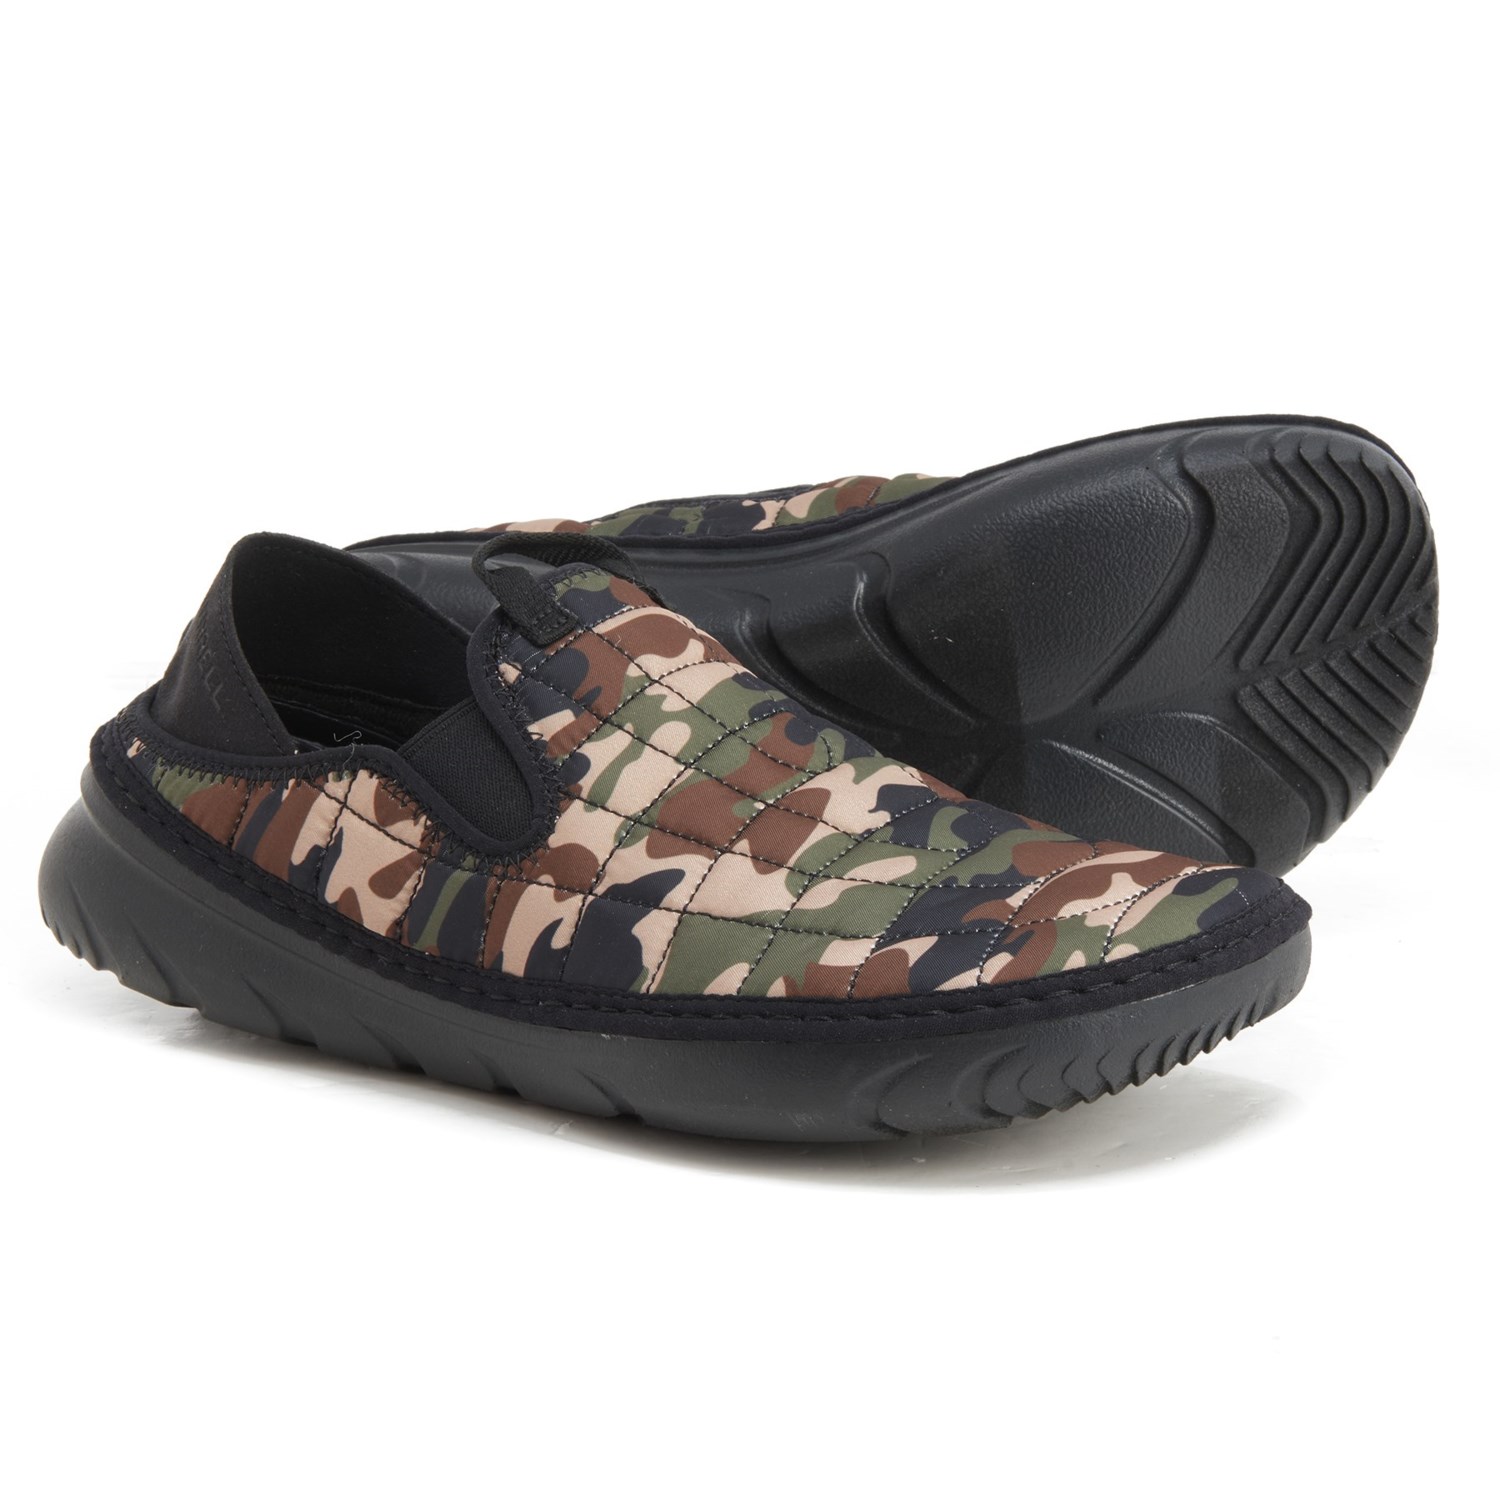 Merrell Quilted Slip Ons Hut Moc Triple Black 